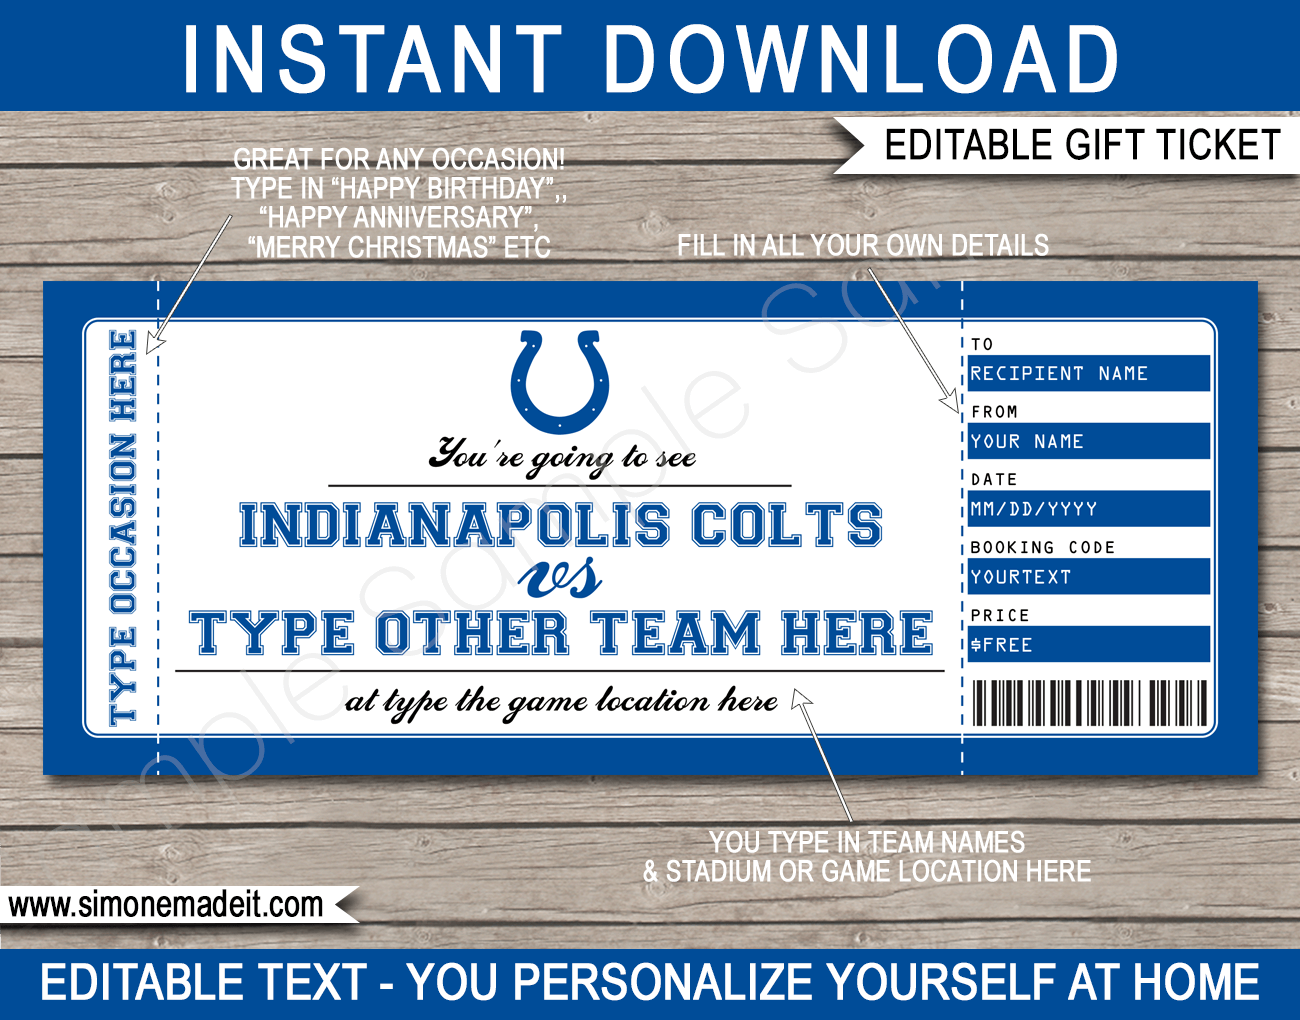 colts game location